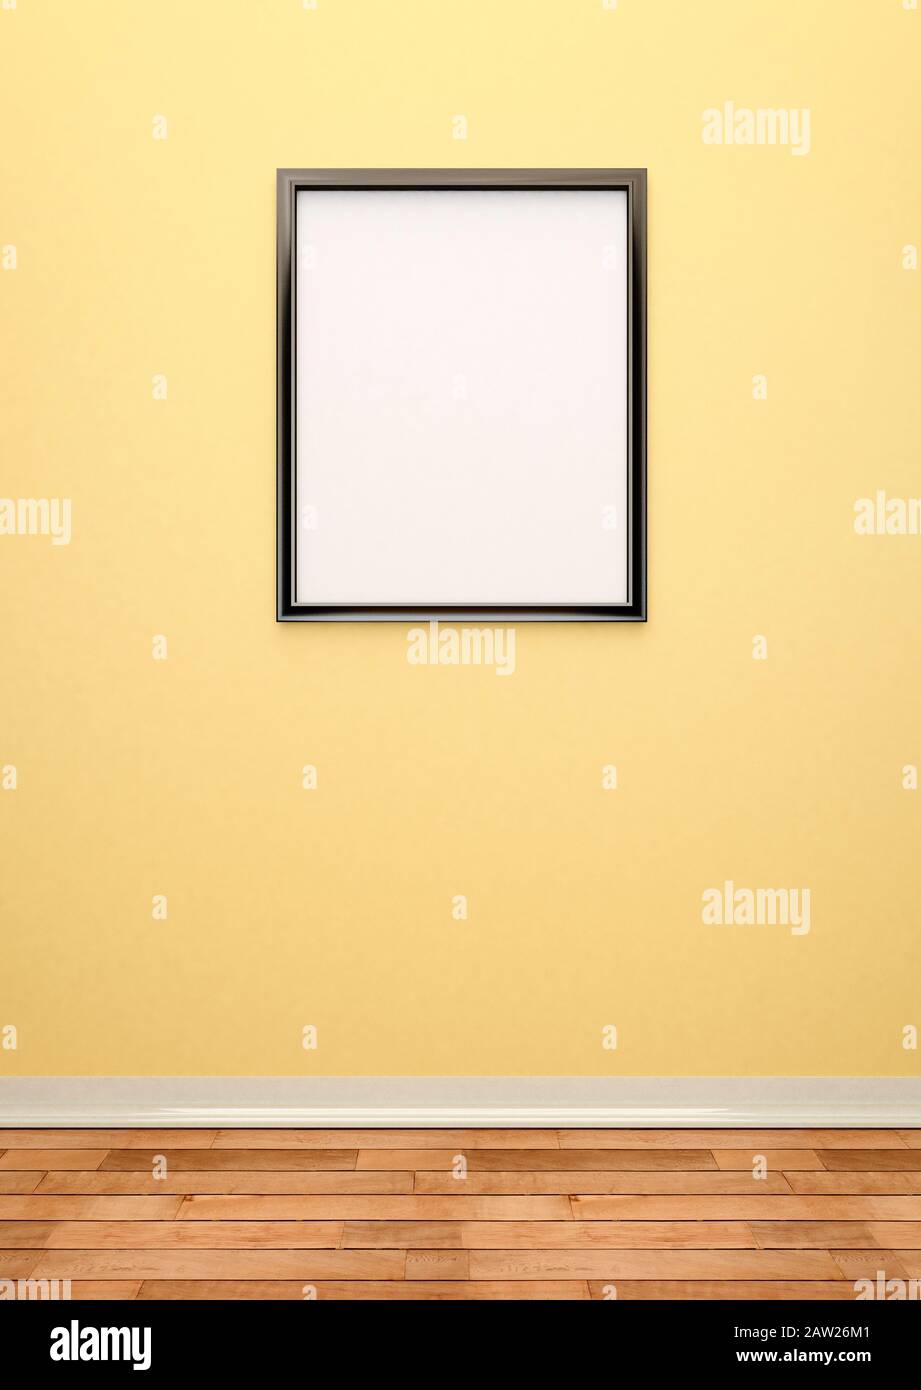 Large black blank picture frame on a yellow wall Stock Photo